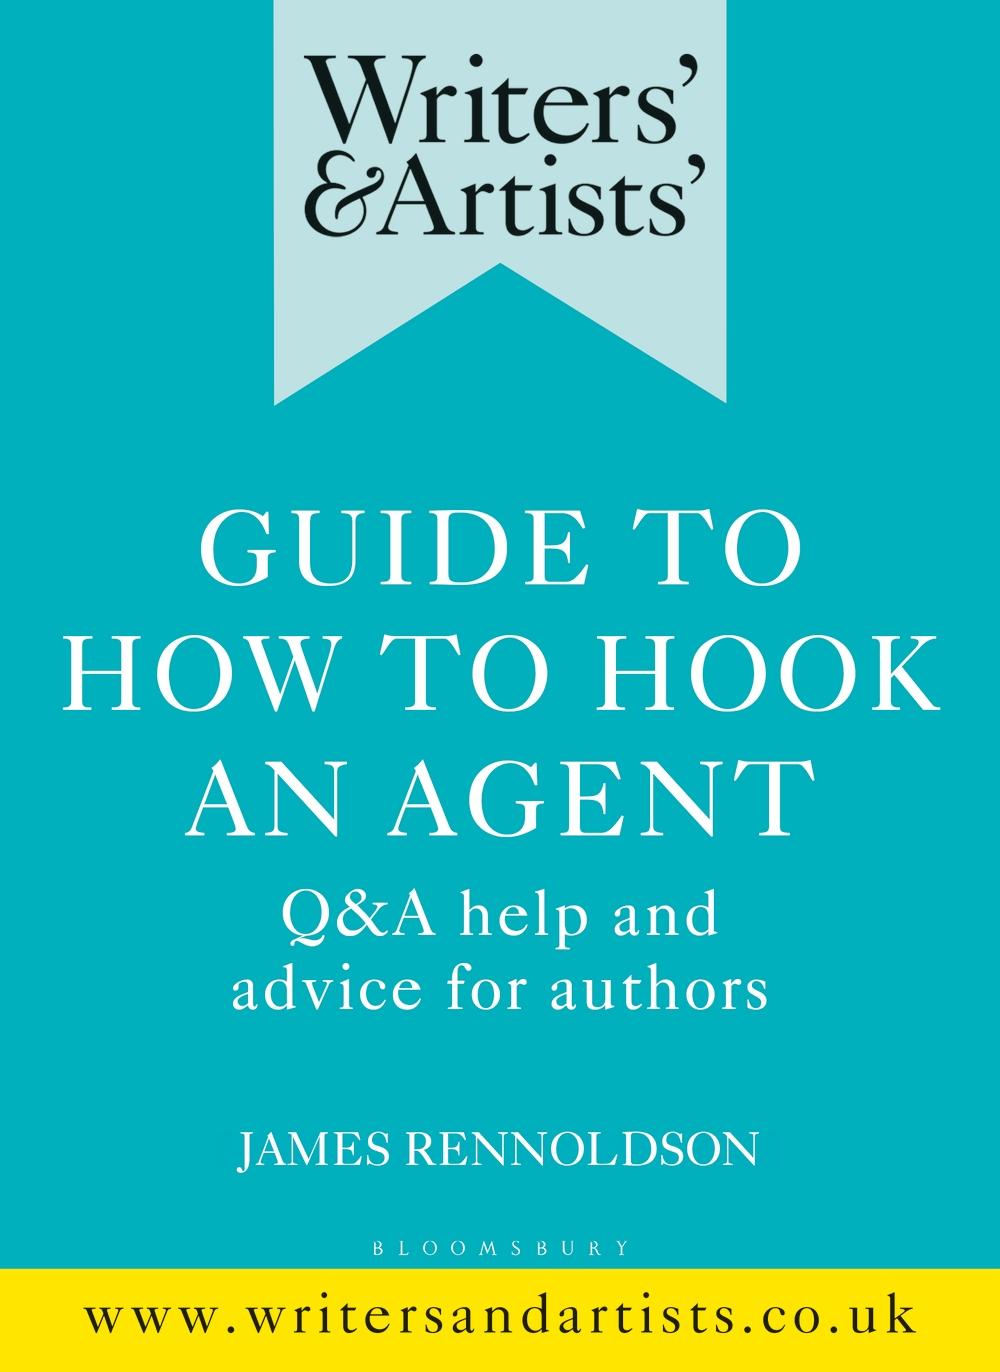 Writers' & Artists' Guide to How to Hook an Agent - James Rennoldson